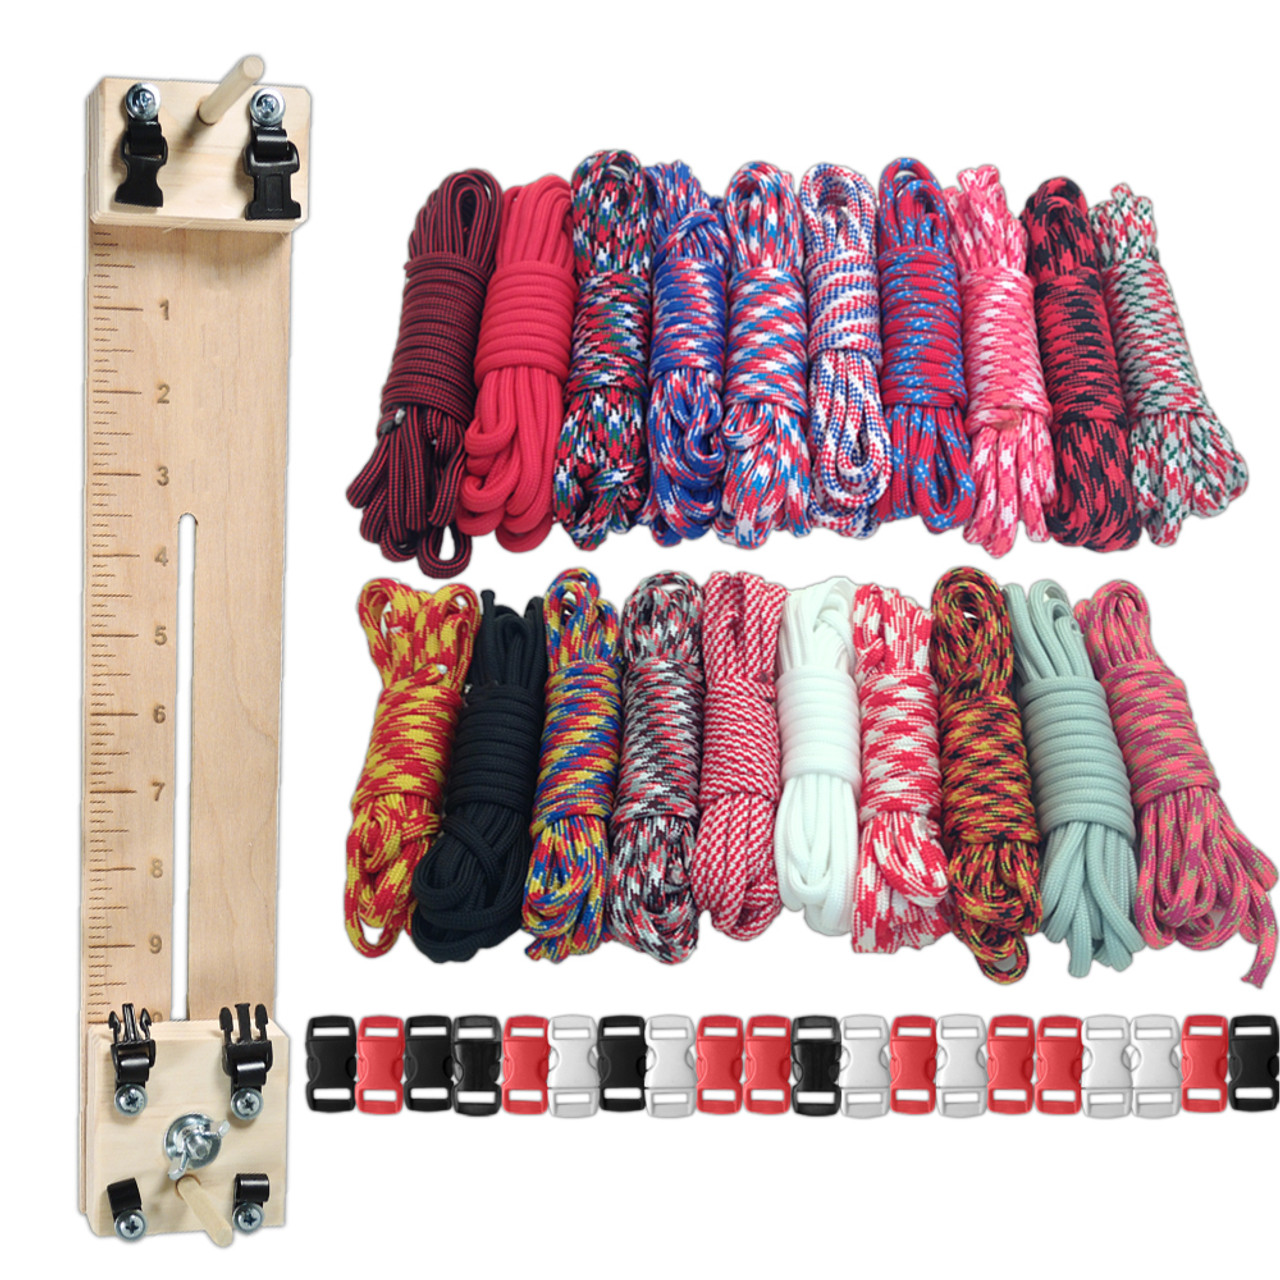 Paracord Combo Crafting Kit with a 10 Pocket Pro Jig - Big Red